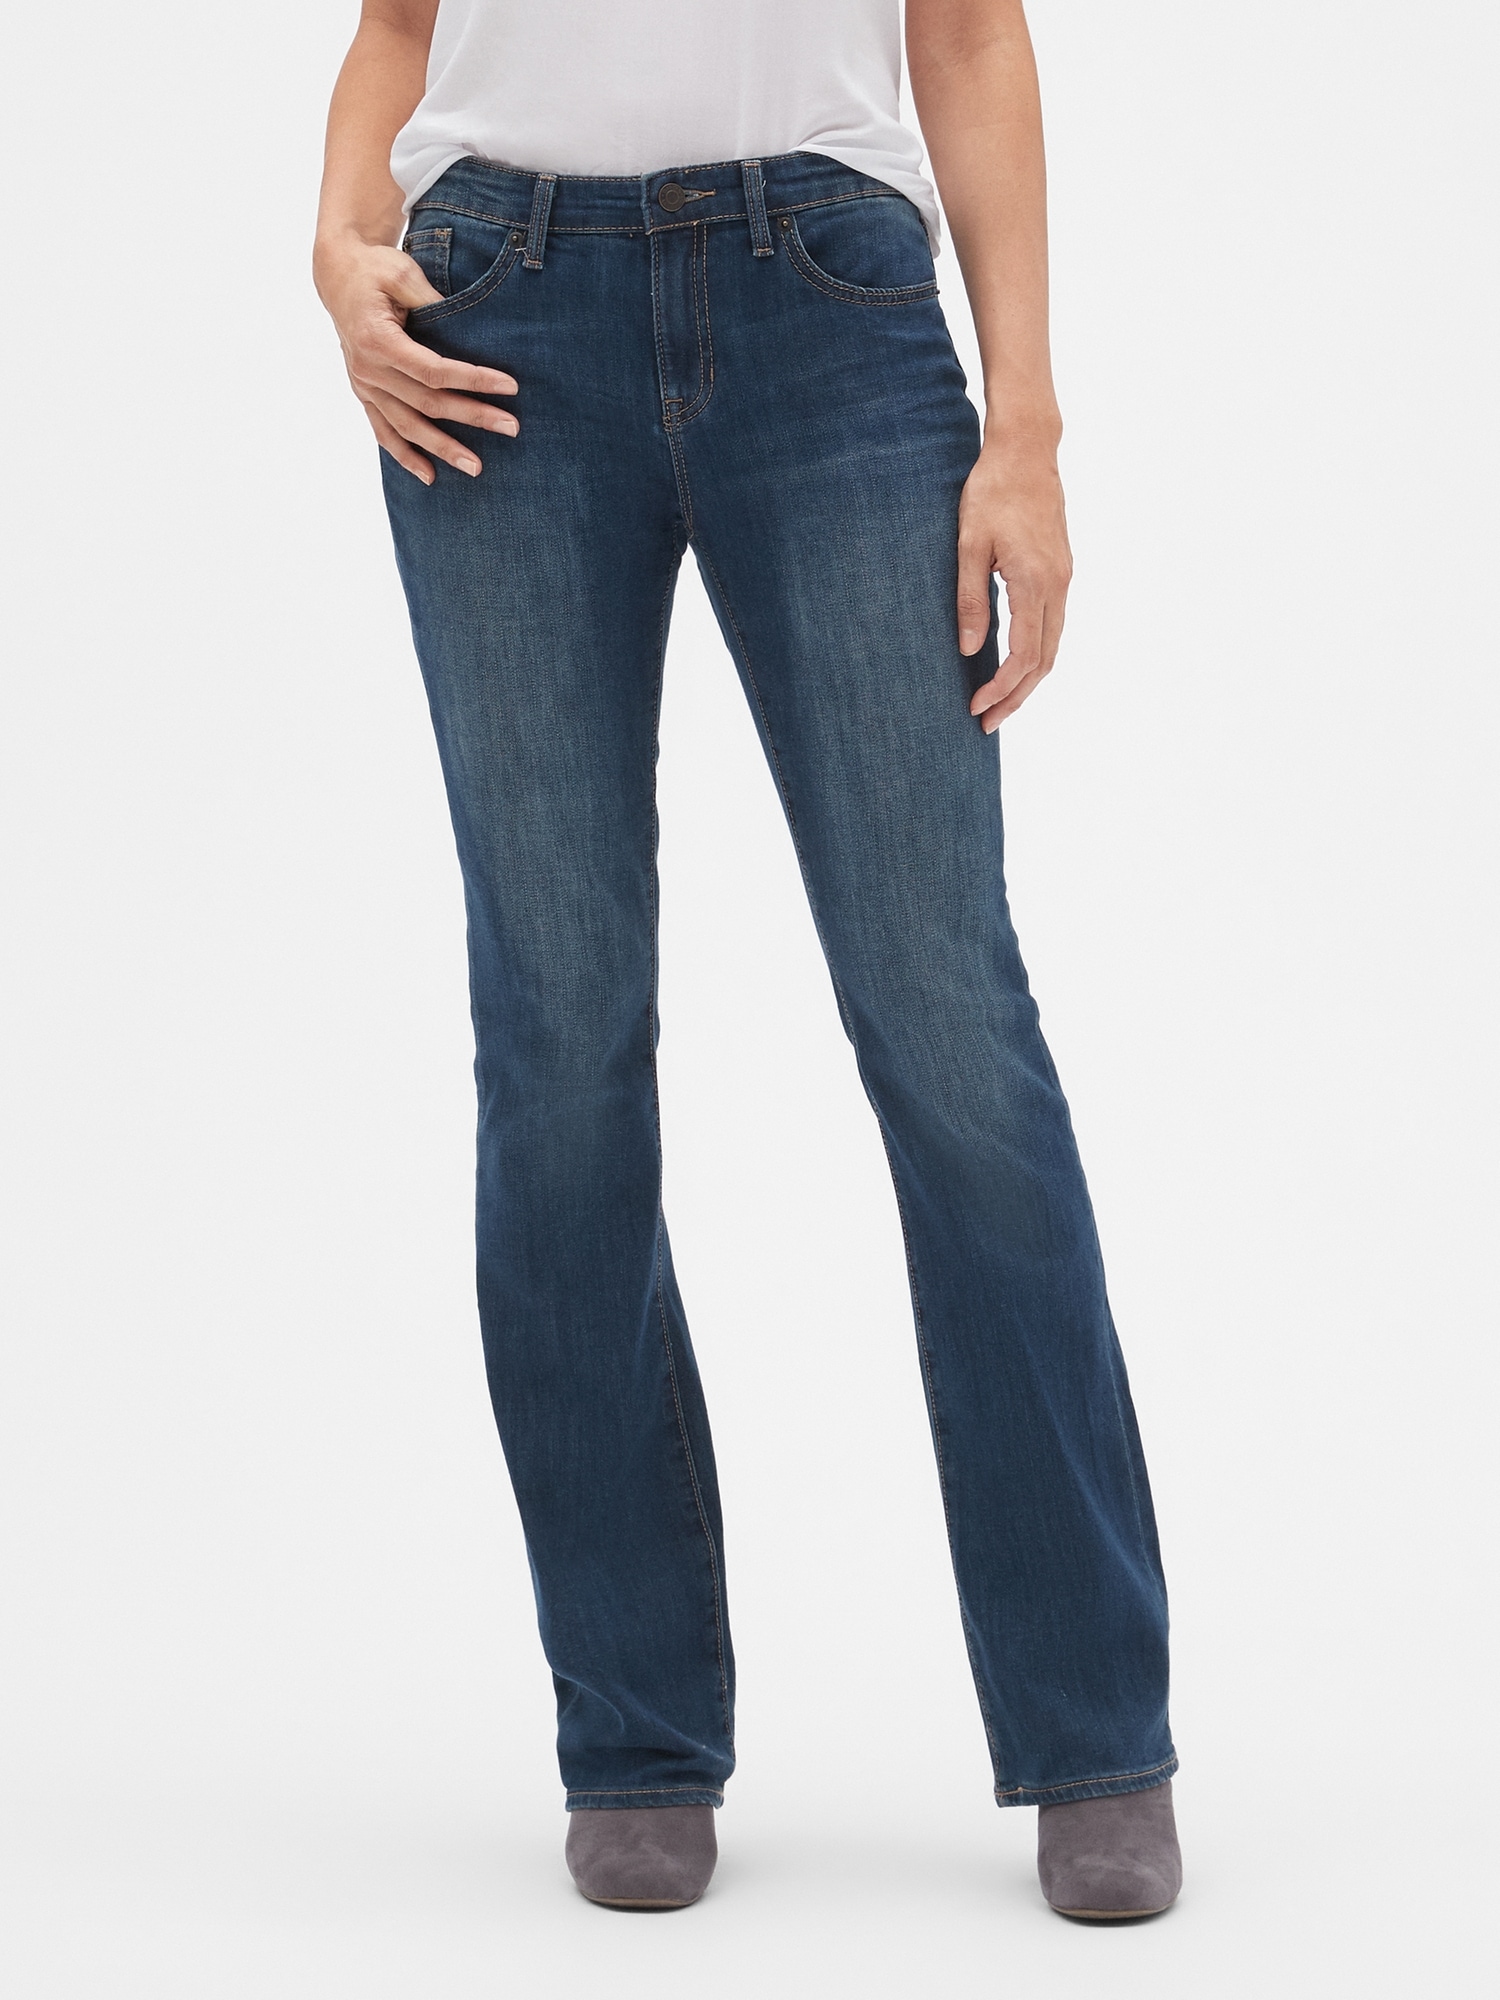 perfect bootcut jeans